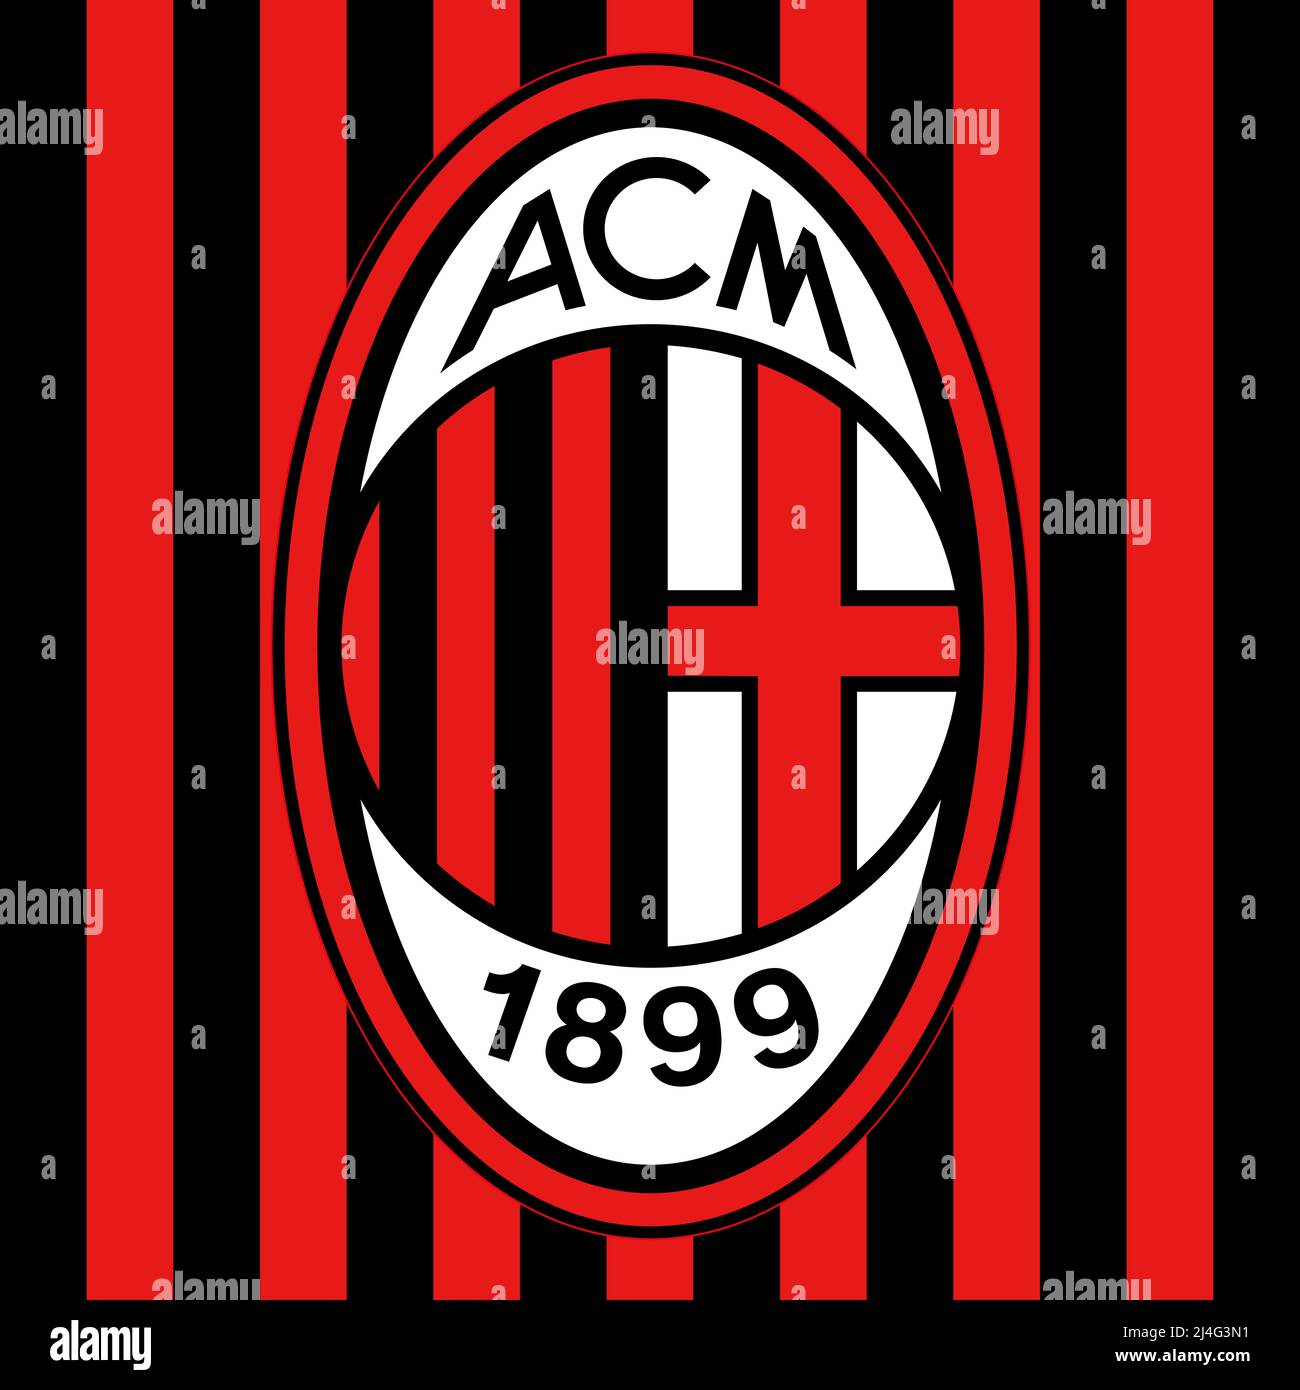 Italy, April - Milan A.C. Football Club brand logo with red black colors, illustration Stock Photo - Alamy